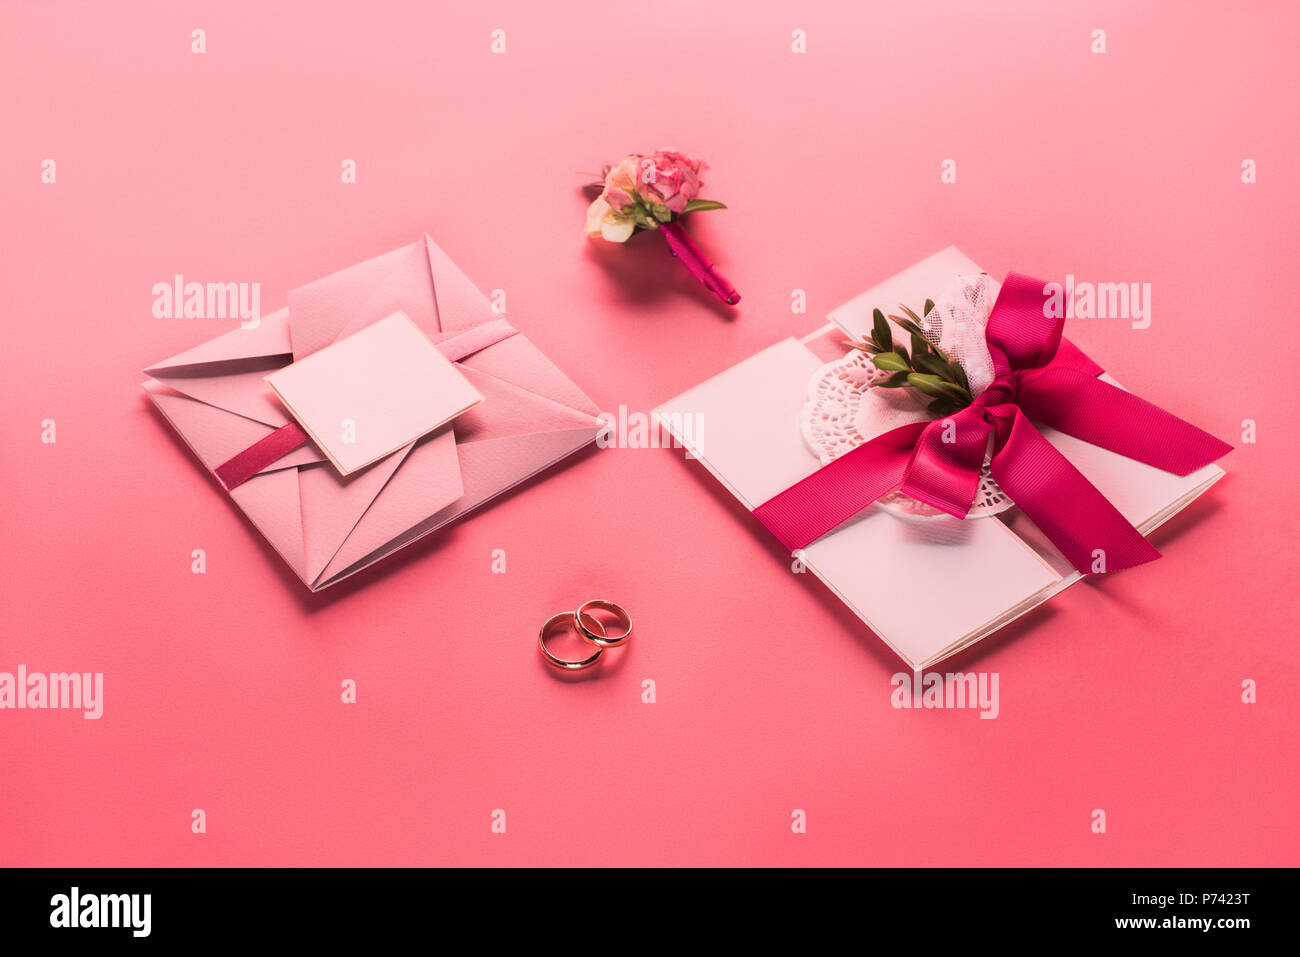 wedding rings, boutonniere and pink envelopes with invitations on pink surface Stock Photo